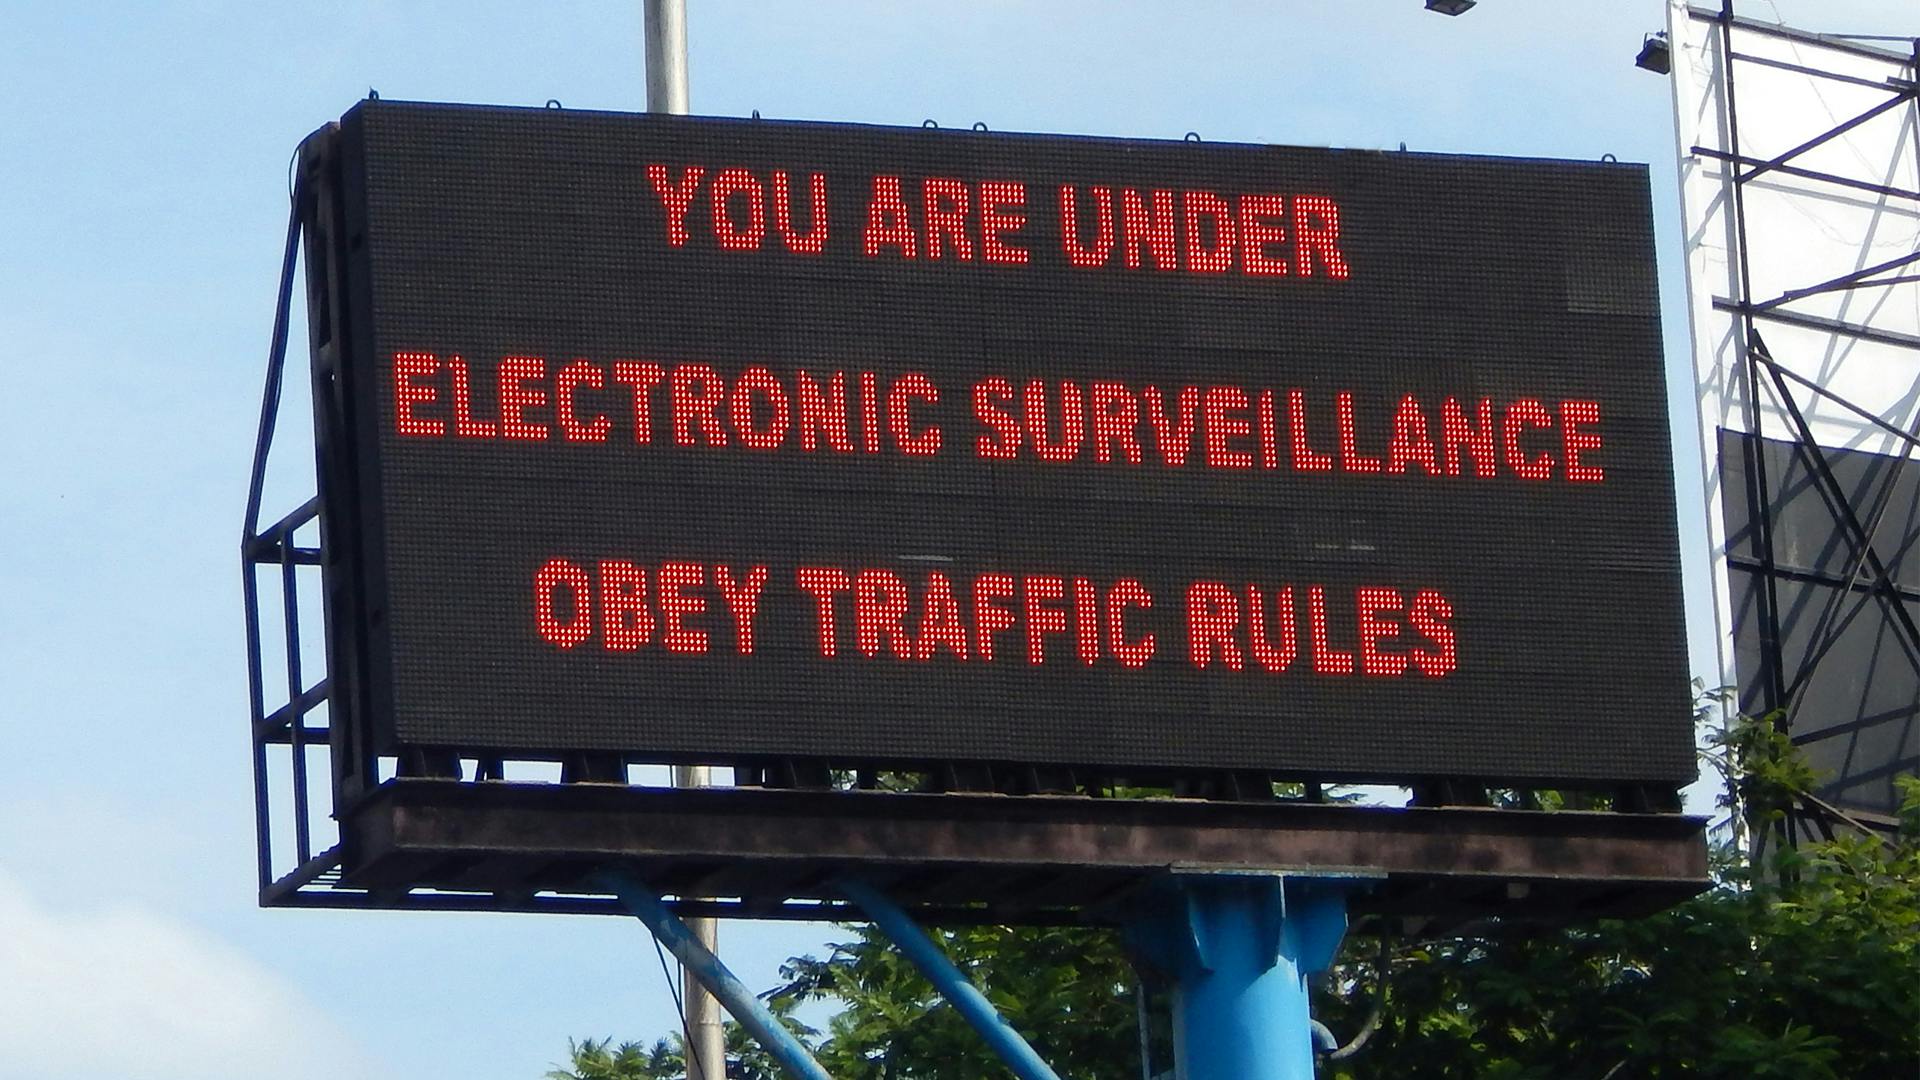 traffic sign reads 'You are under electronic surveillance obey traffic rules'